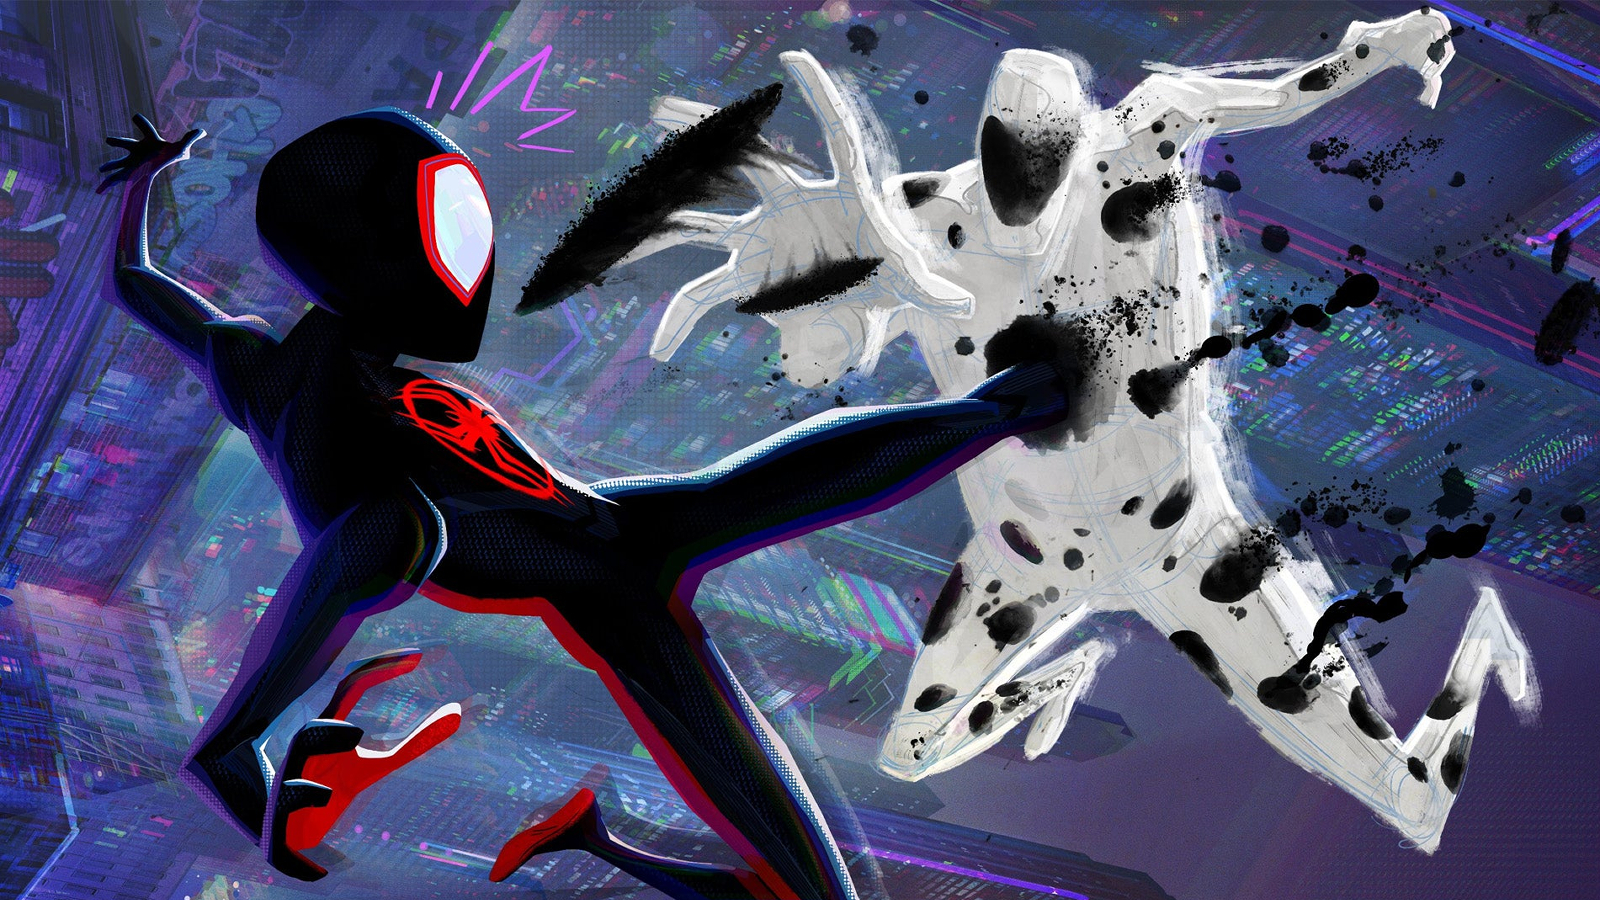 When is Spider-Man: Across the Spider-Verse streaming? - Dexerto